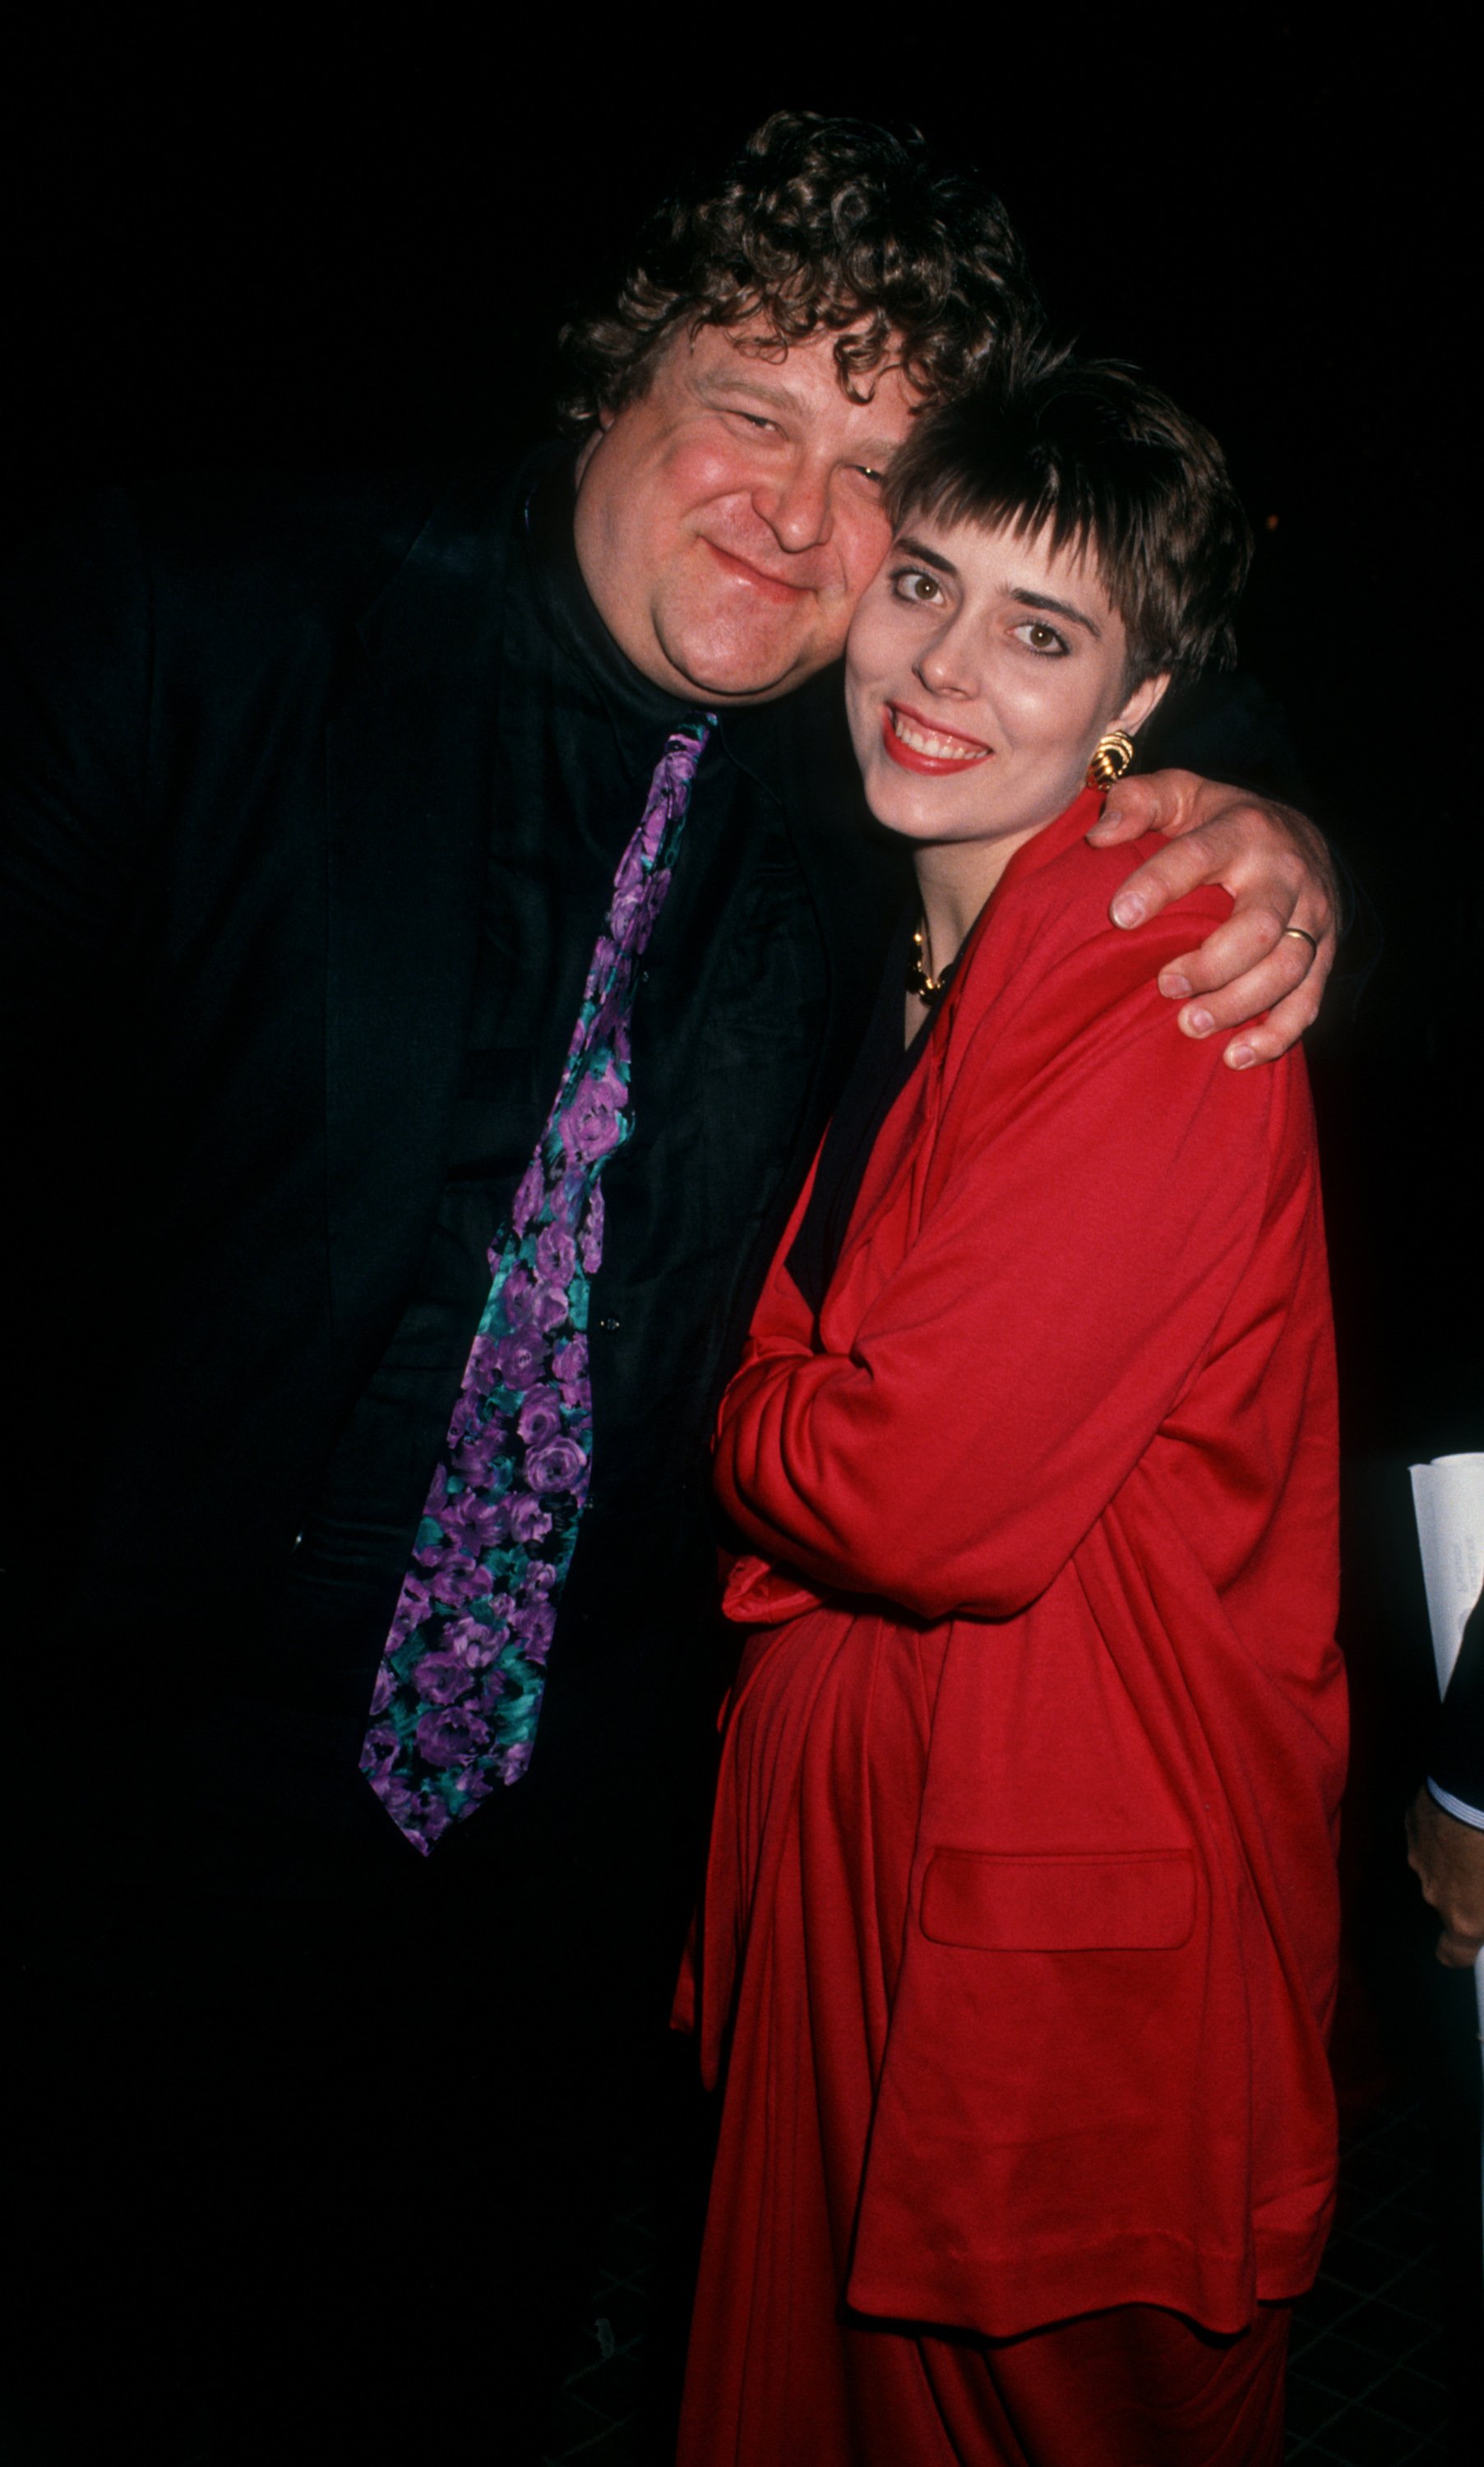 John Goodman and Anna Beth Goodman pose at the premiere of 'Stella' at the Westwood Avco Theater on January 31, 1991, in Westwood, California | Source: Getty Images